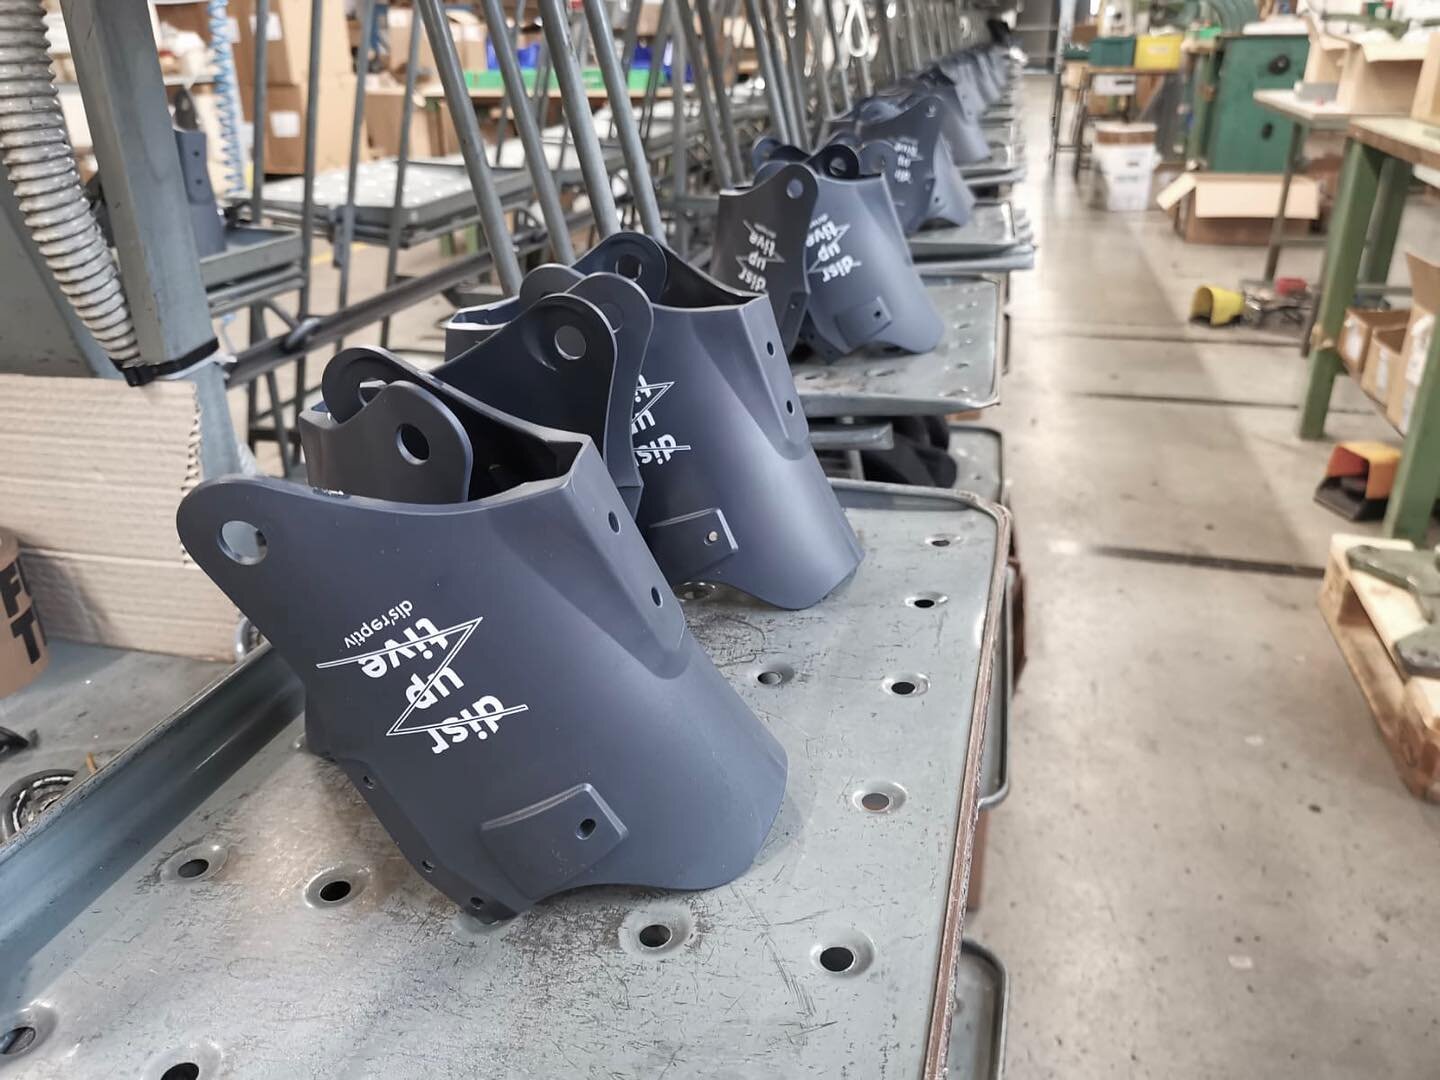 Cuffs on the assembly line a few weeks ago 😍

Due to delays from our buckle supplier, final assembly of the Disruptive is slightly behind schedule. As it looks right now, shipping should start in two weeks.

We&rsquo;re sorry about the delay but wou